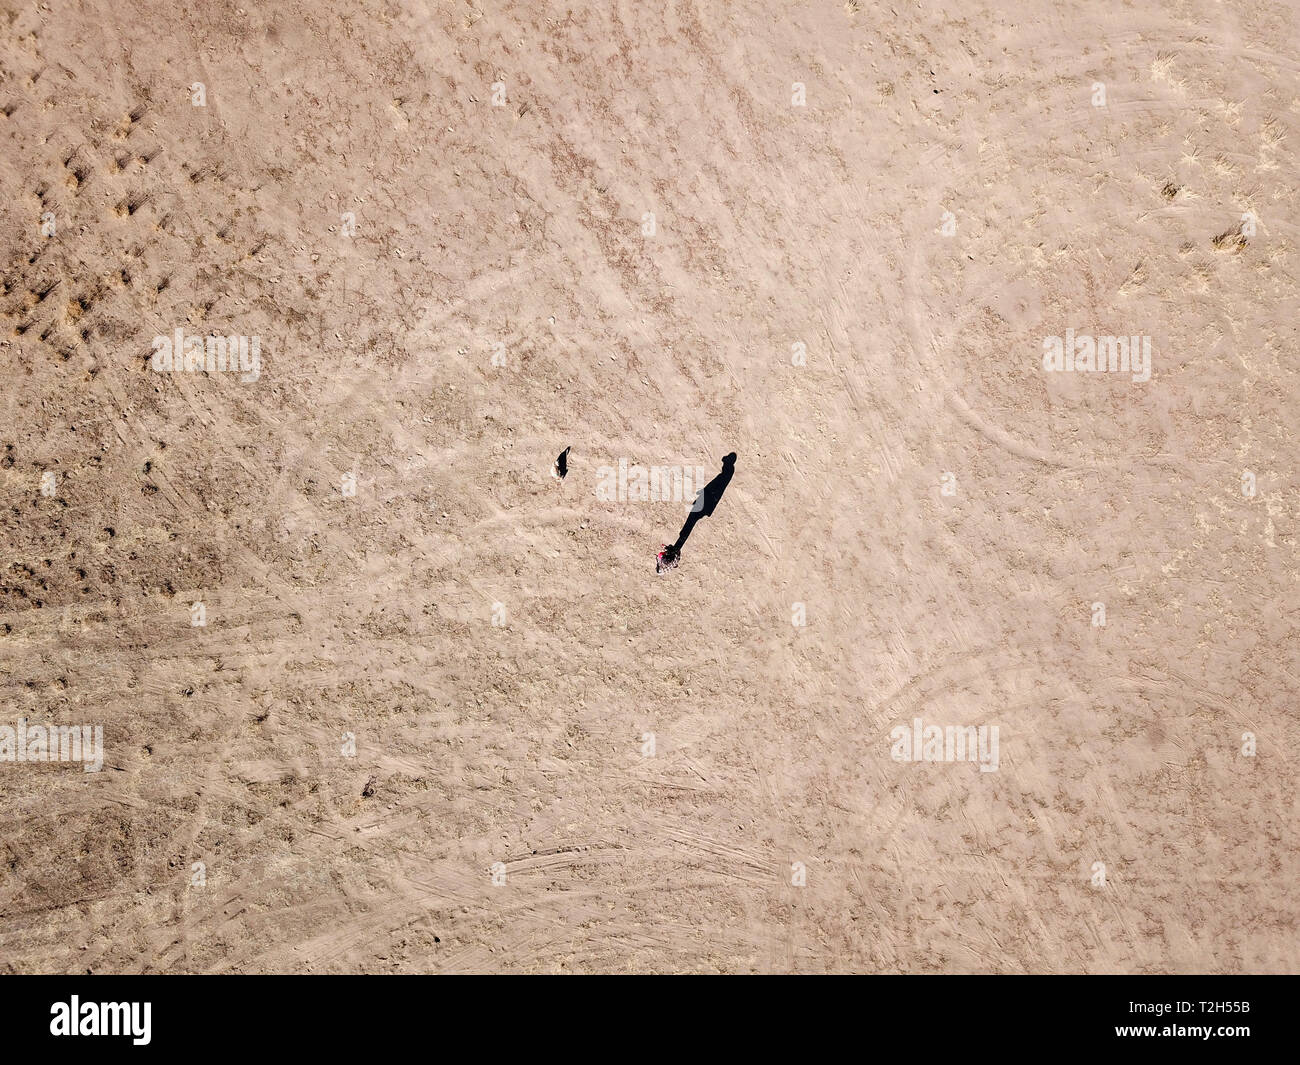 Top down view of a man walking his dog in a dirt field Stock Photo